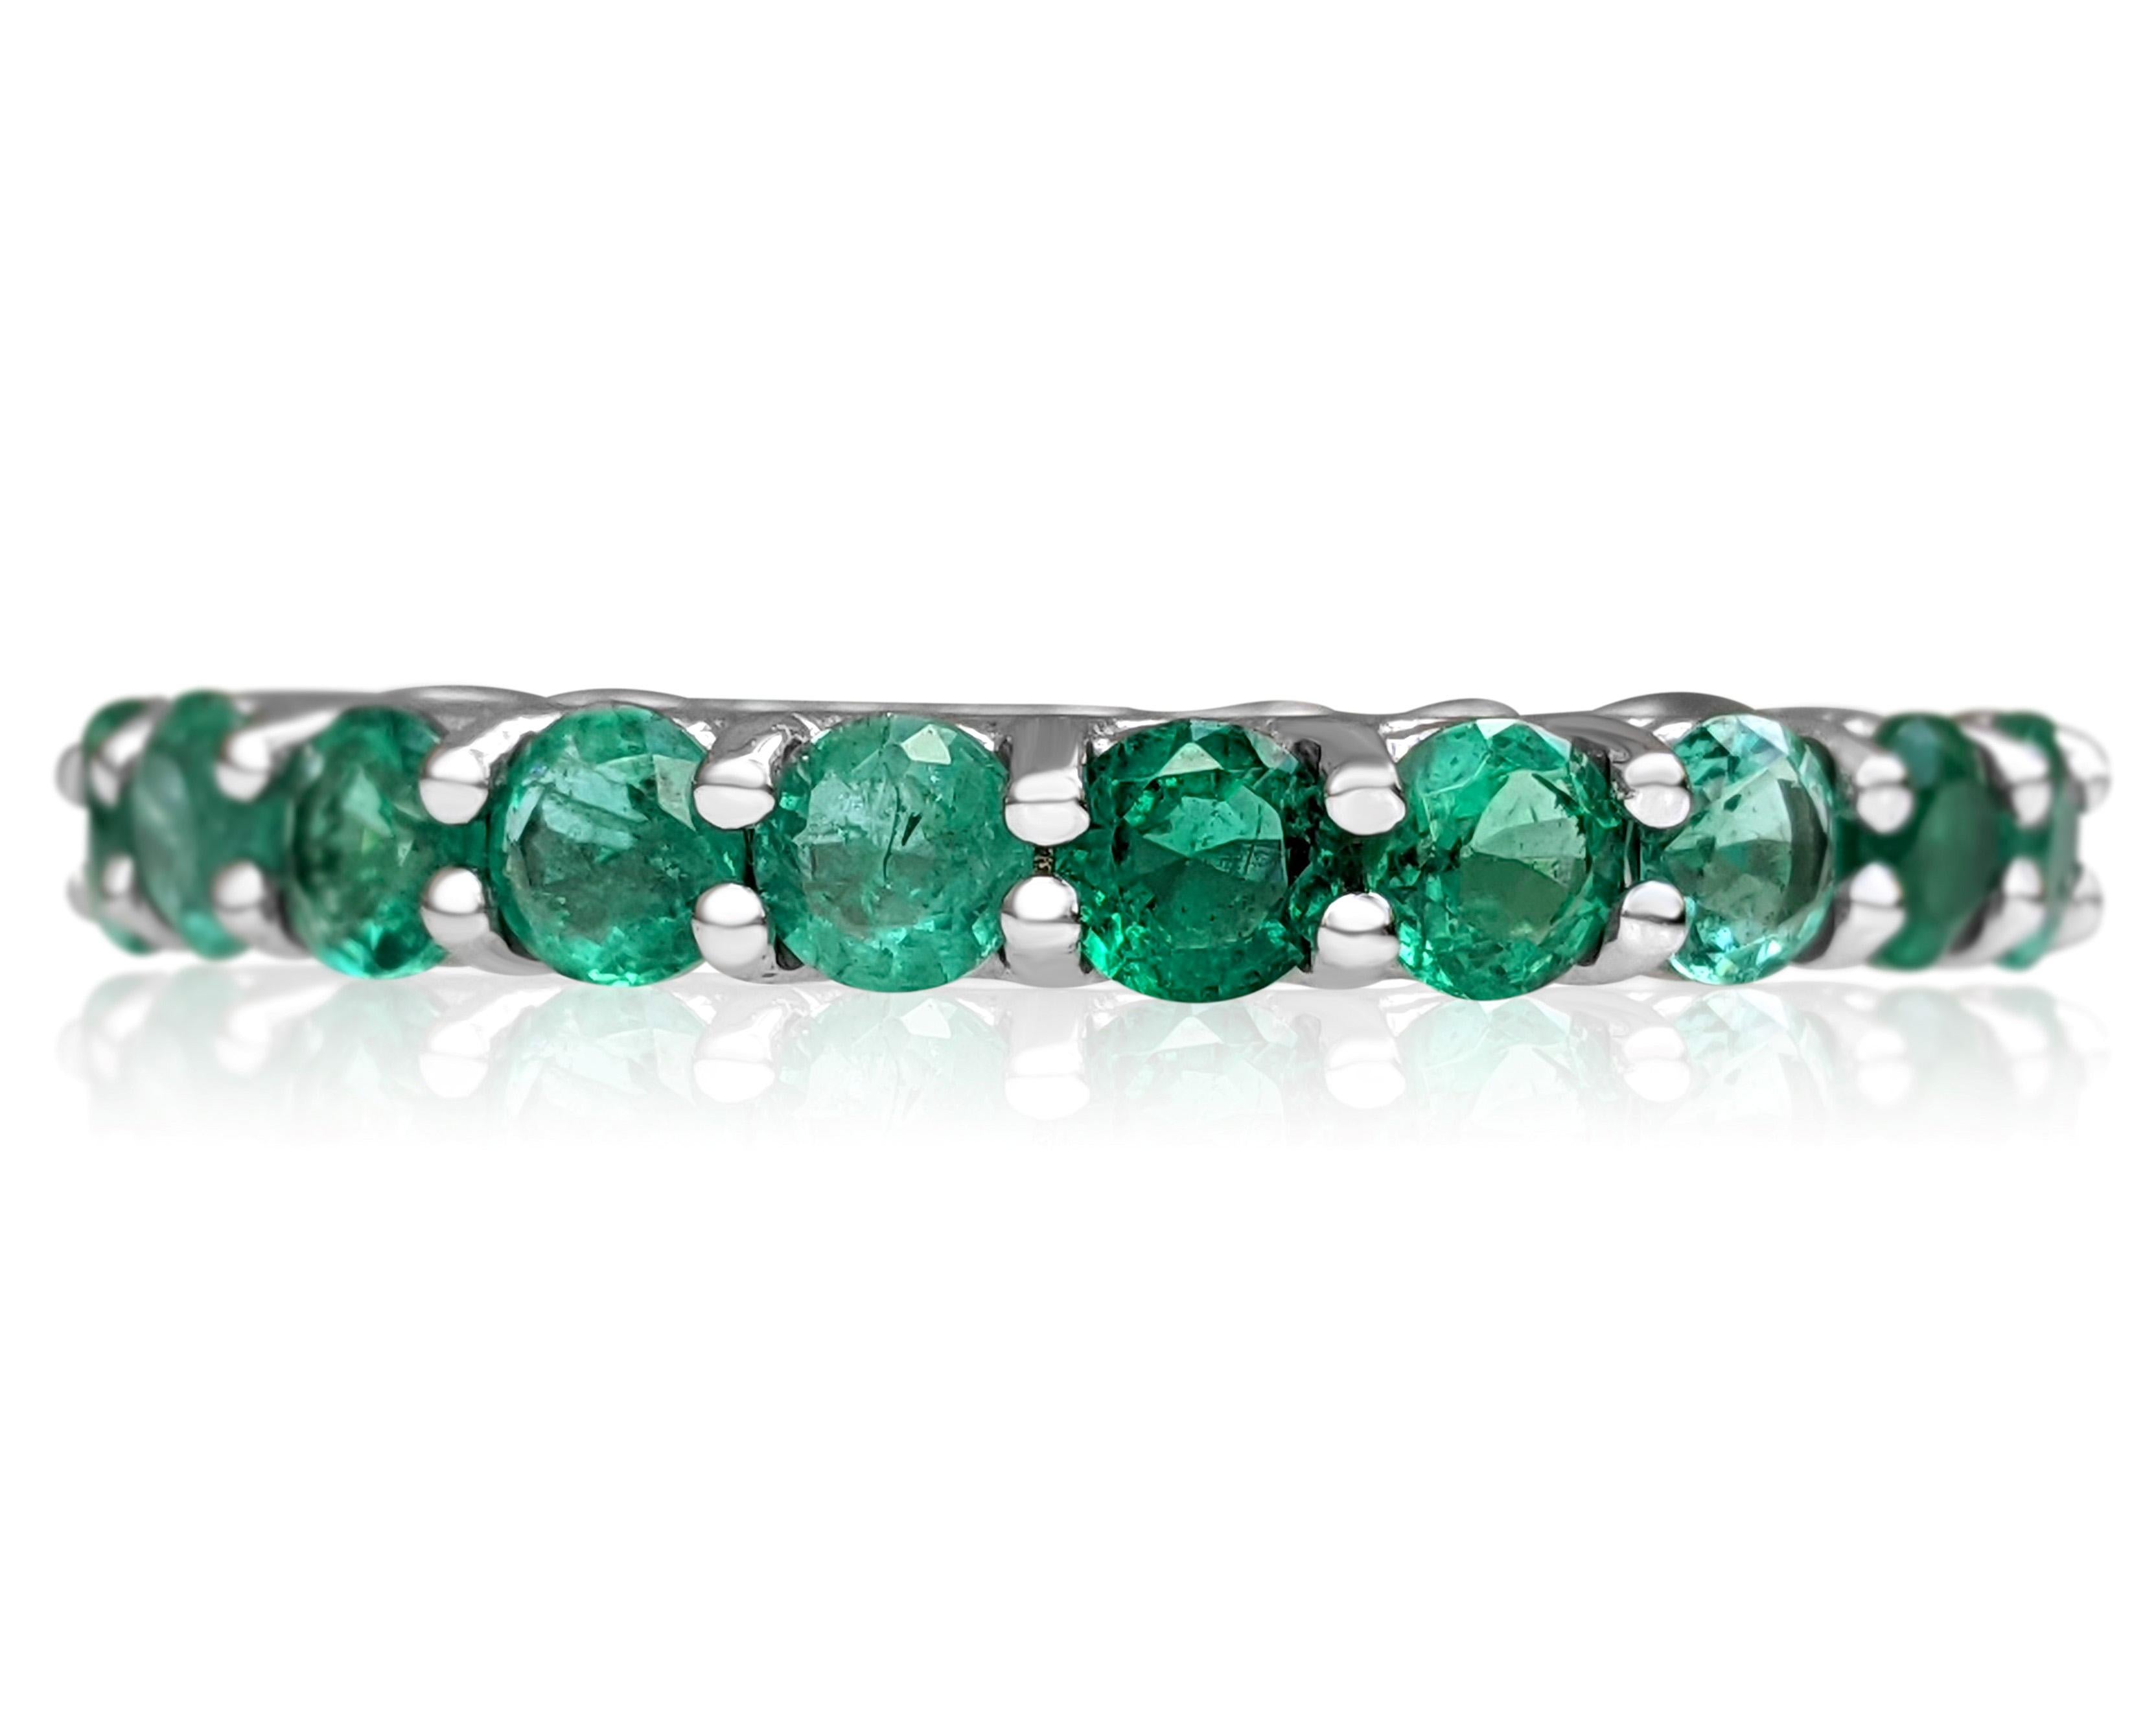 Center Natural Emerald:
Weight: 2.32 ct, 22 stones
Colour: Green
Shape: Round Mixed
Emerald are generally oiled

Item ships from Israeli Diamonds Exchange, customers are responsible for any local customs or VAT fees that might apply to the purchase.